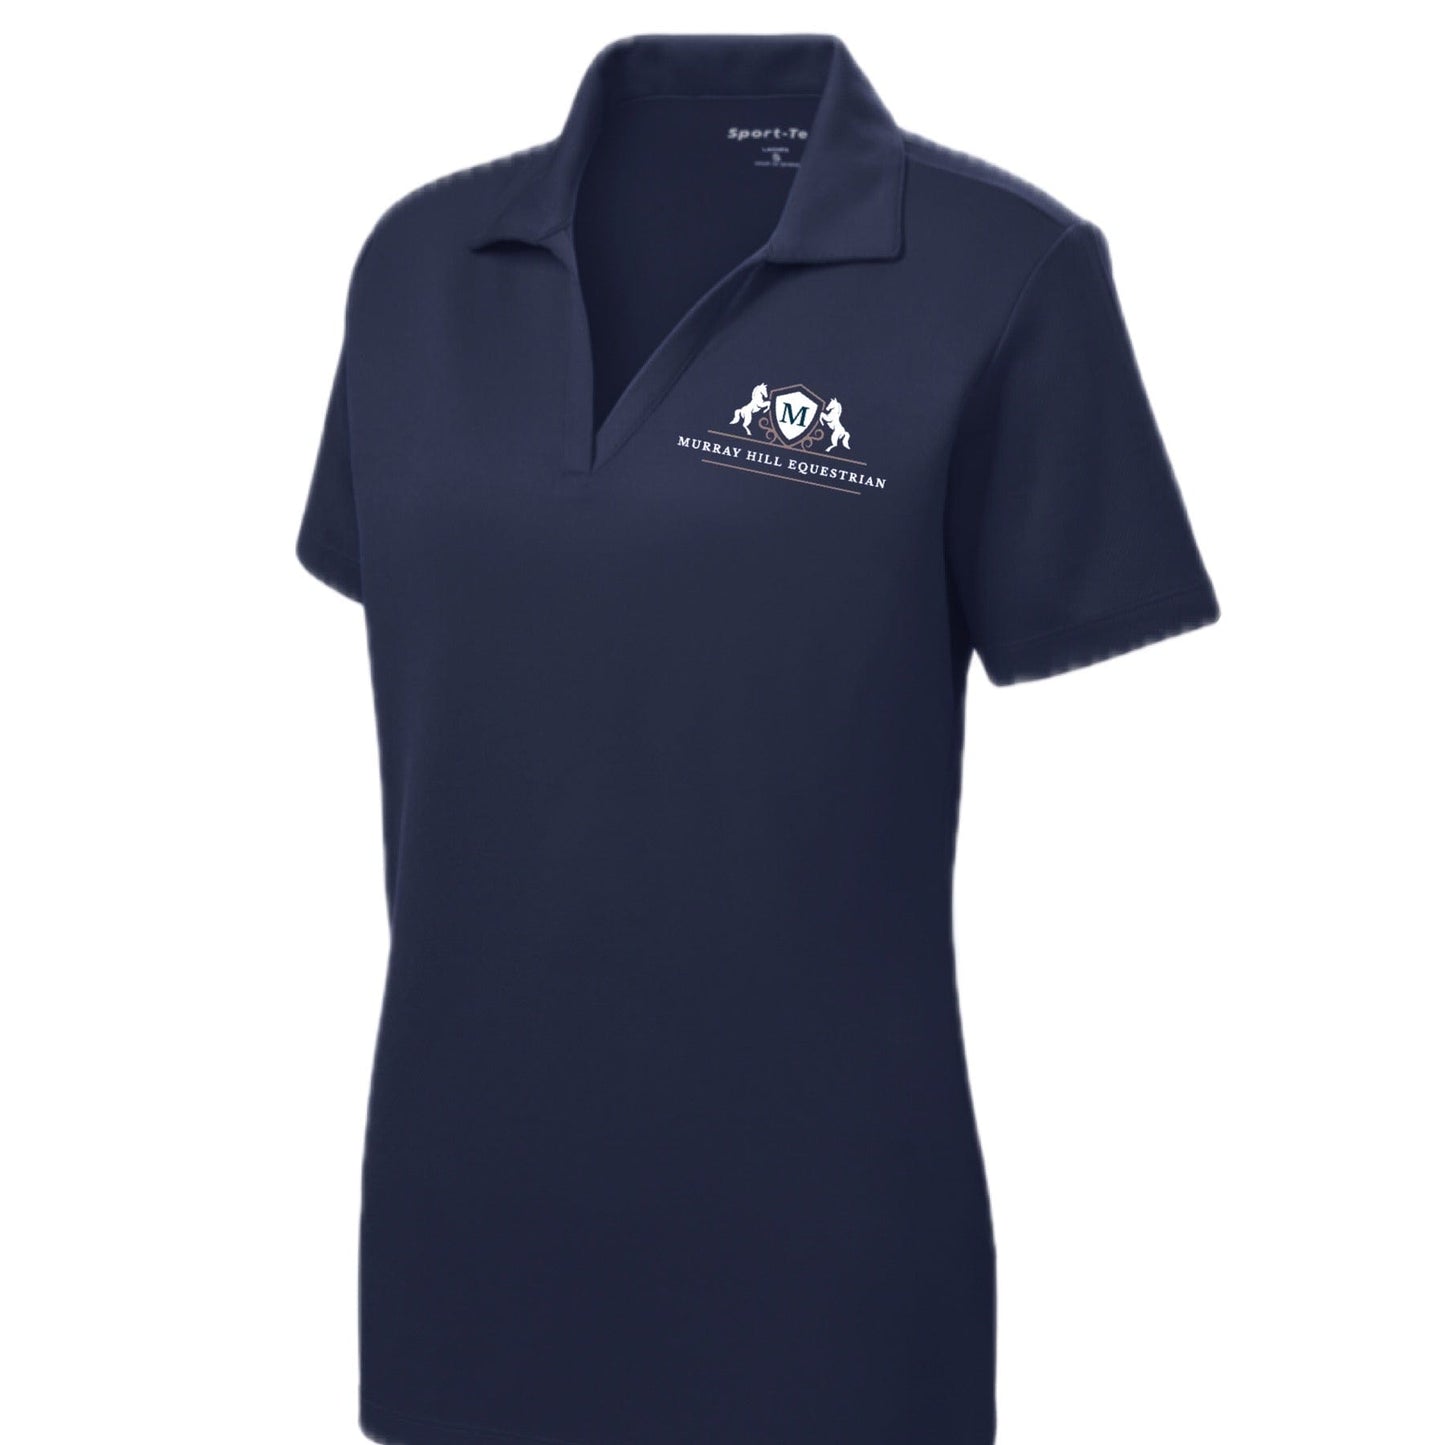 Equestrian Team Apparel XS / Navy Murray Hill Equestrian Ladies Polo equestrian team apparel online tack store mobile tack store custom farm apparel custom show stable clothing equestrian lifestyle horse show clothing riding clothes horses equestrian tack store